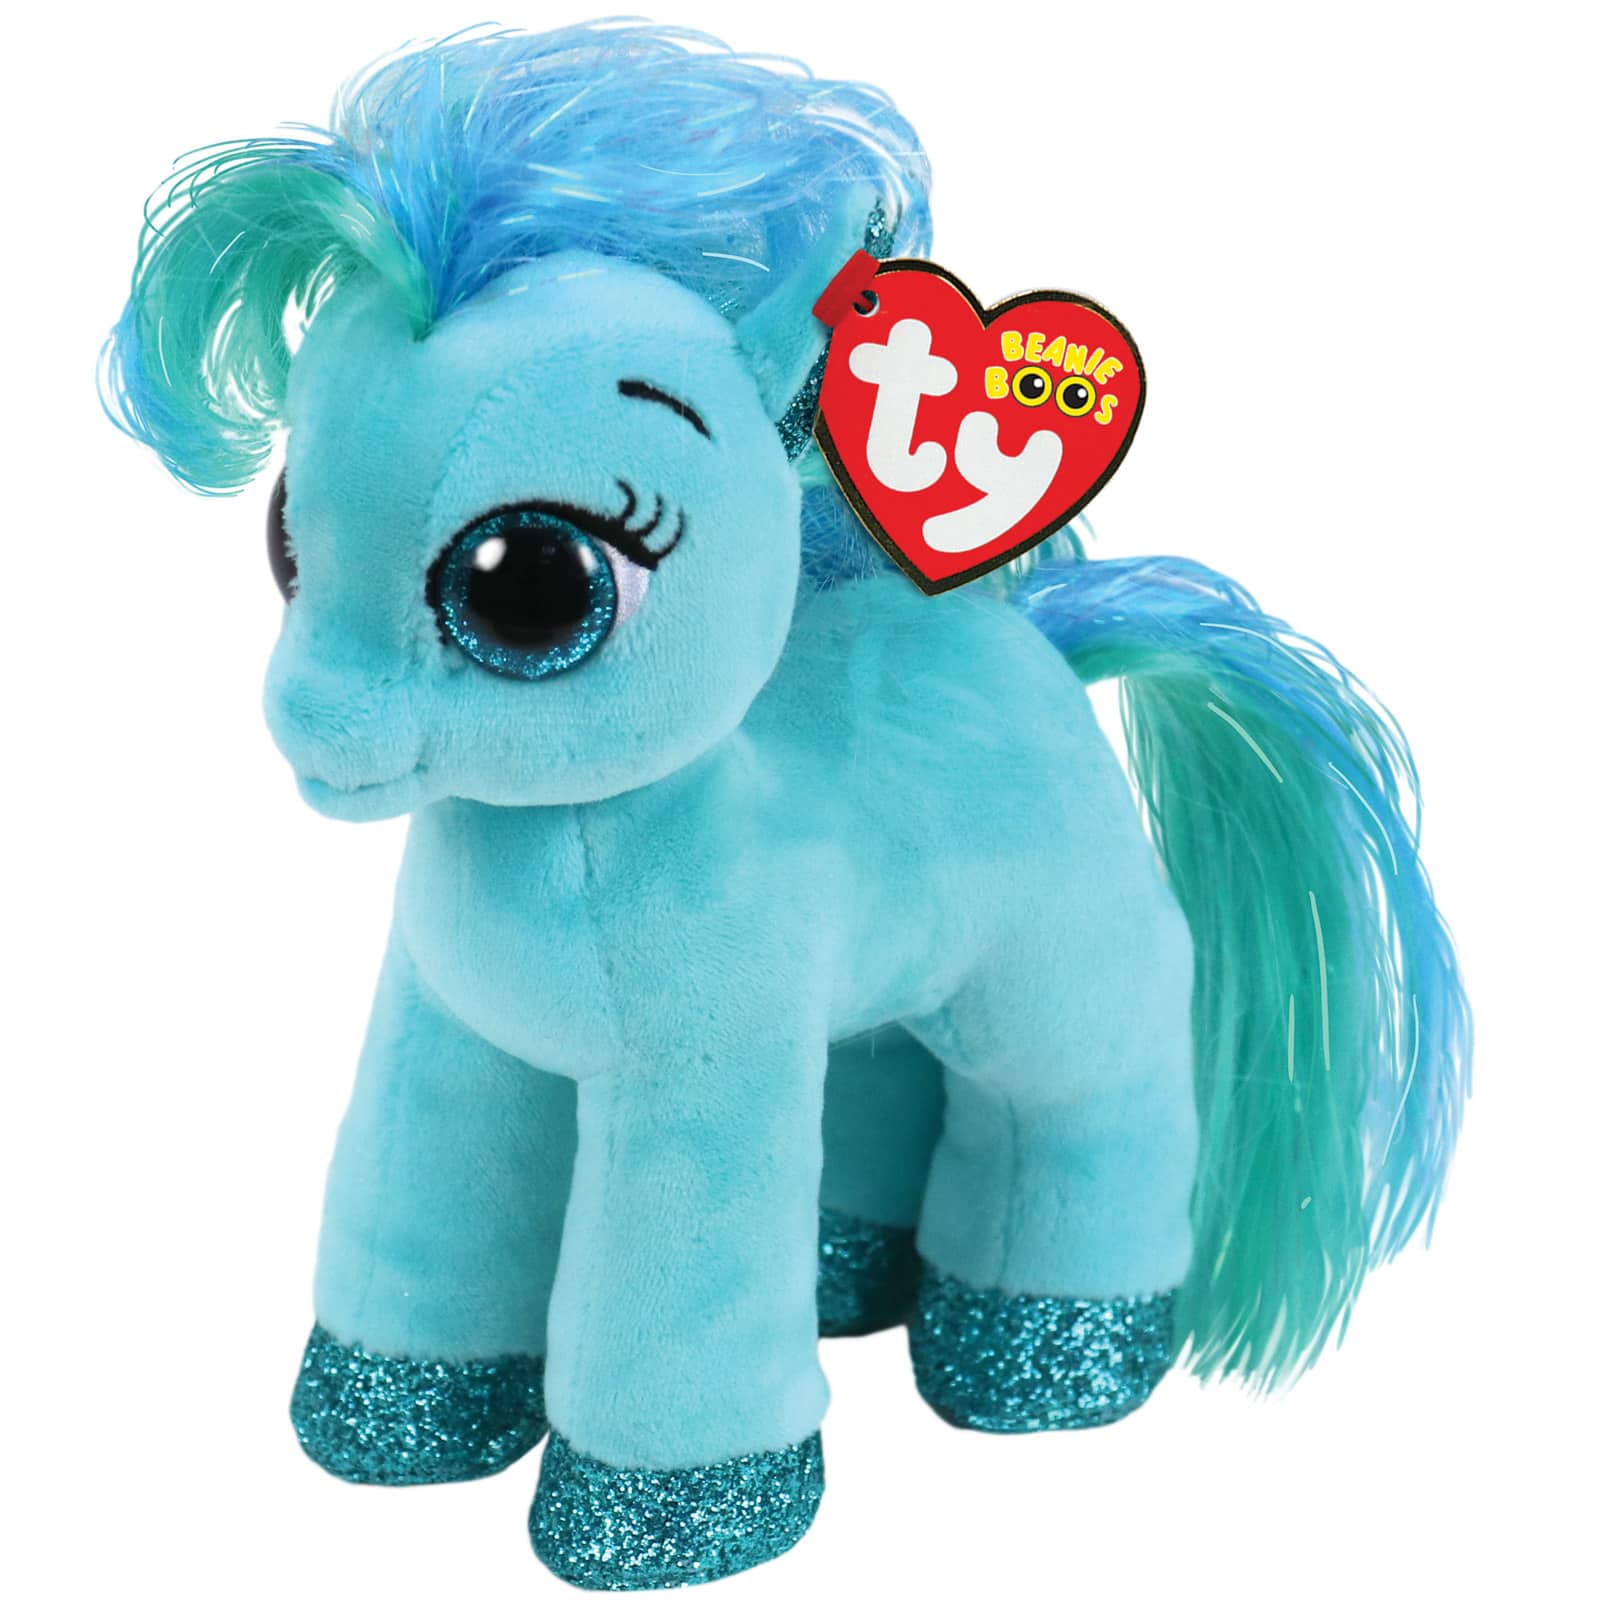 TY Beanie Boo Topaz the teal Pony Small 6” Soft Toy 